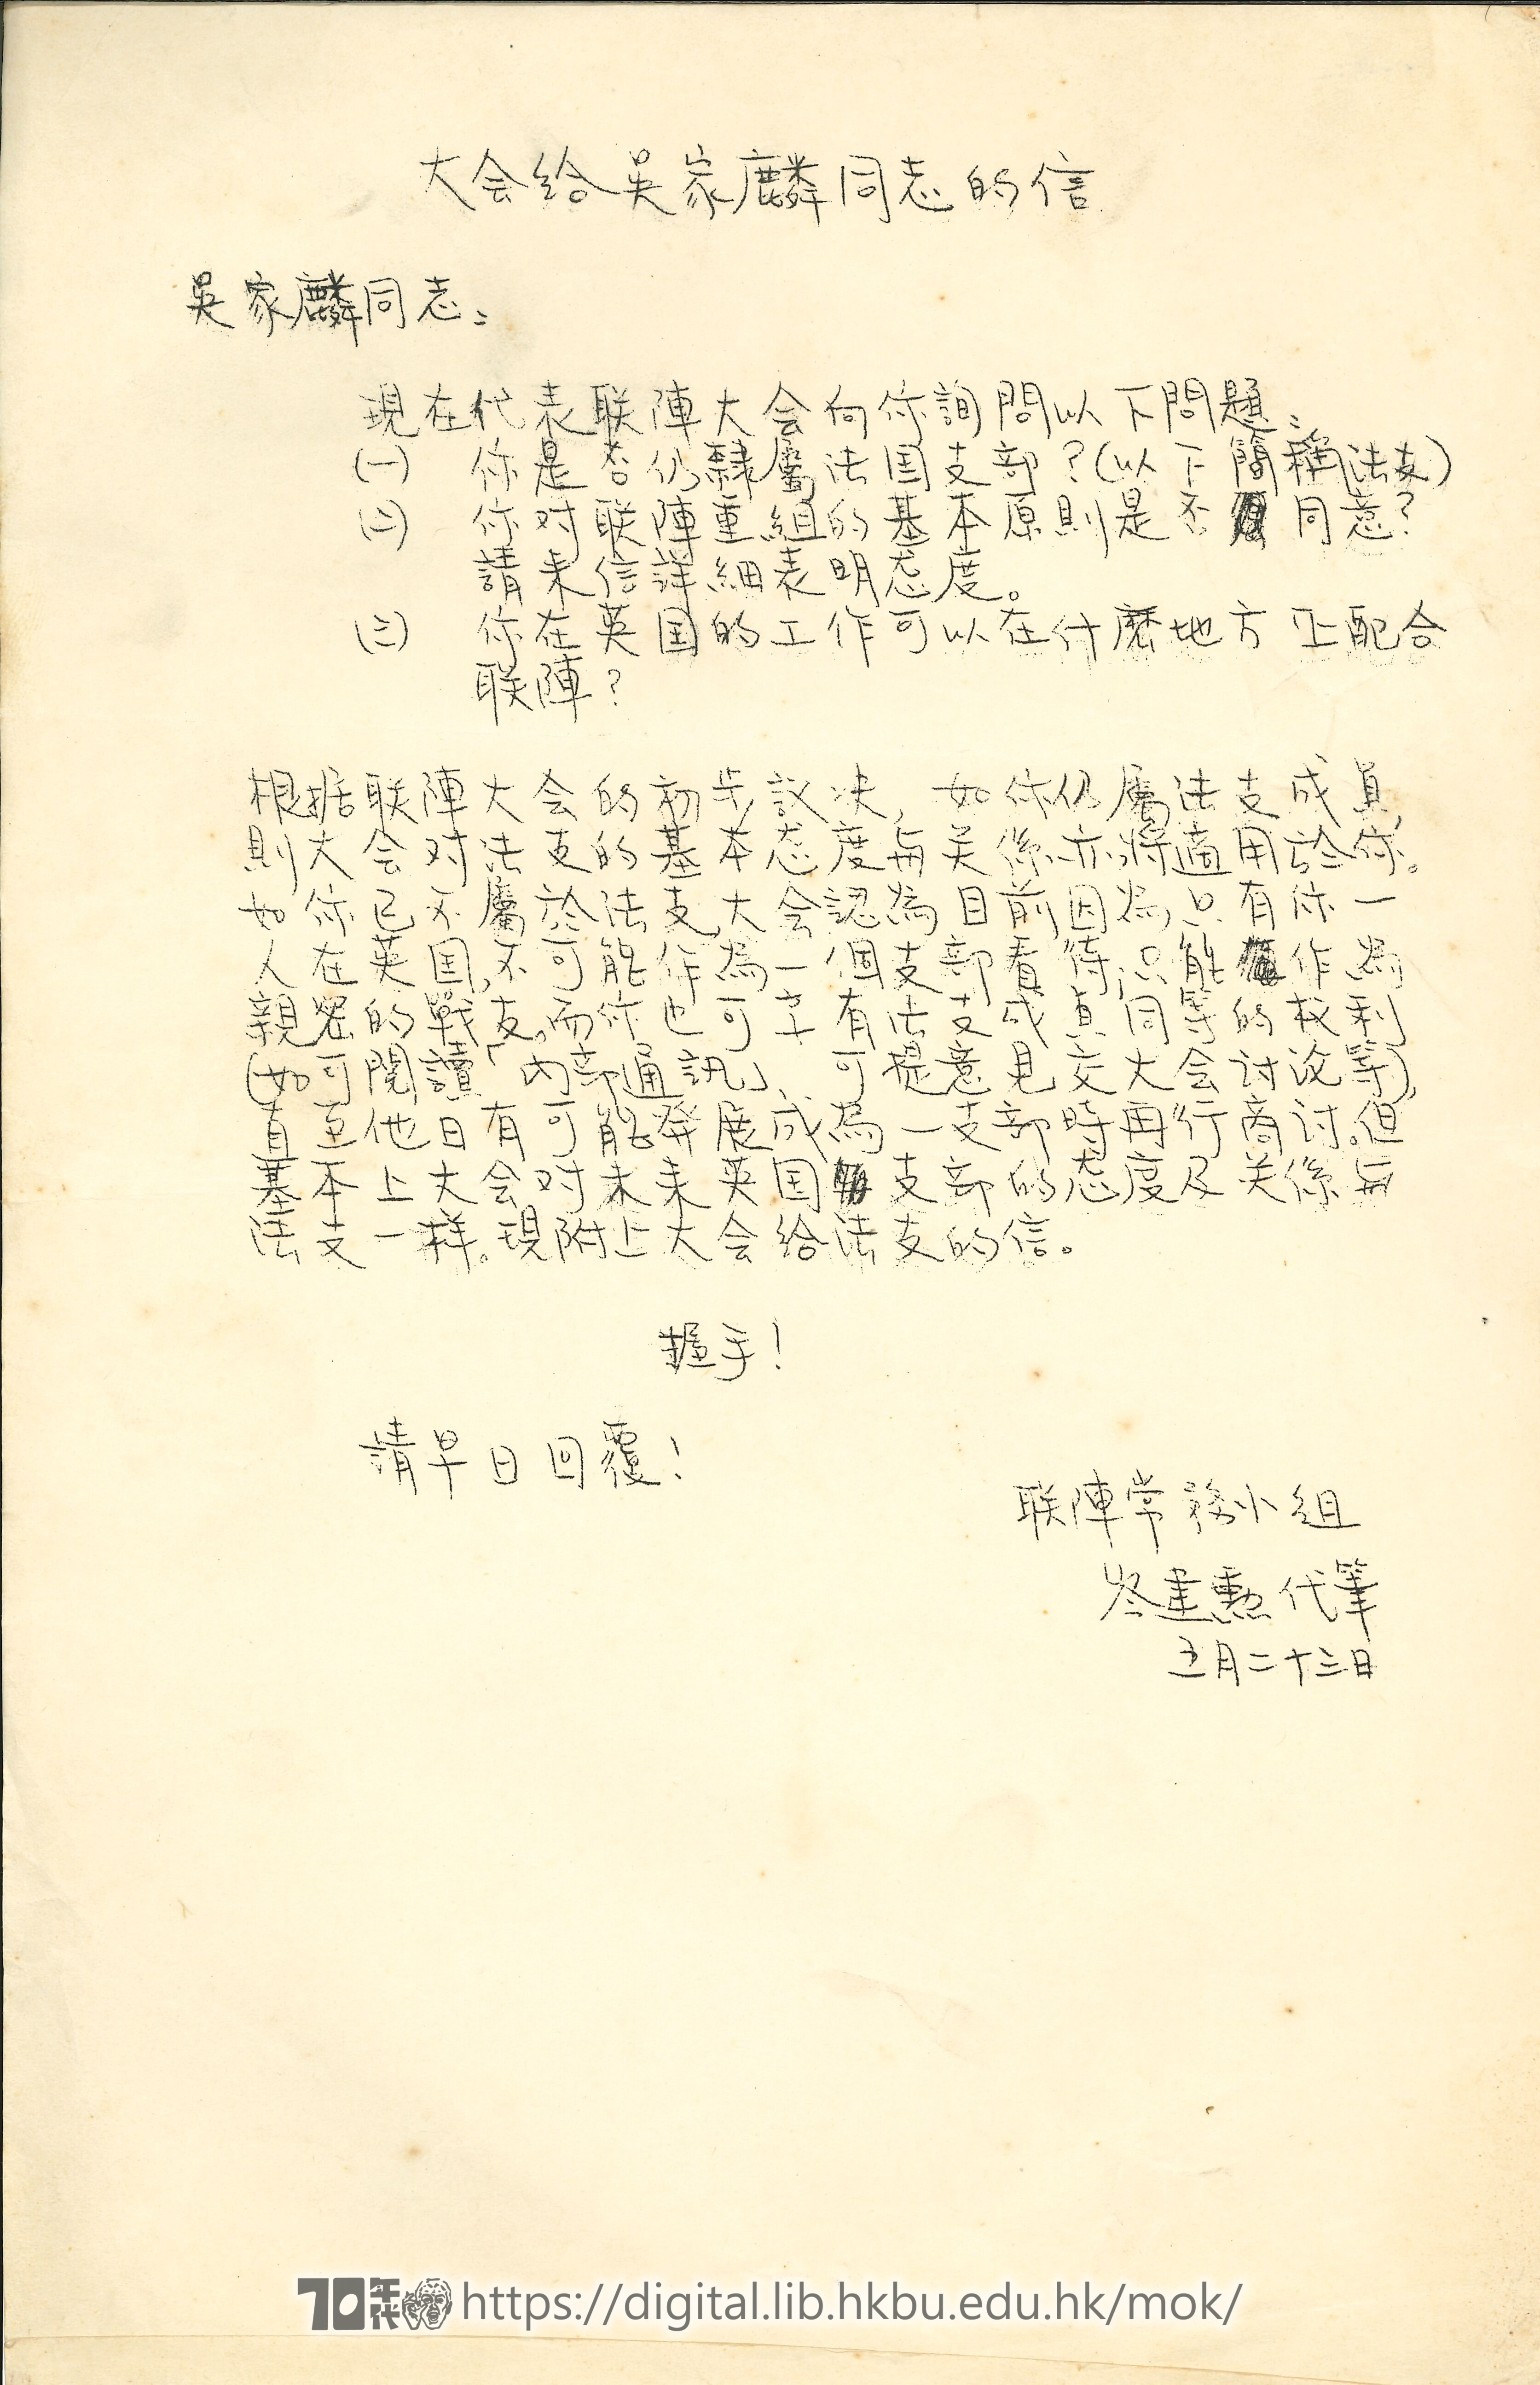   Letter from executive committee of United Front to Ng Ka-lun 聯陣常務小組 